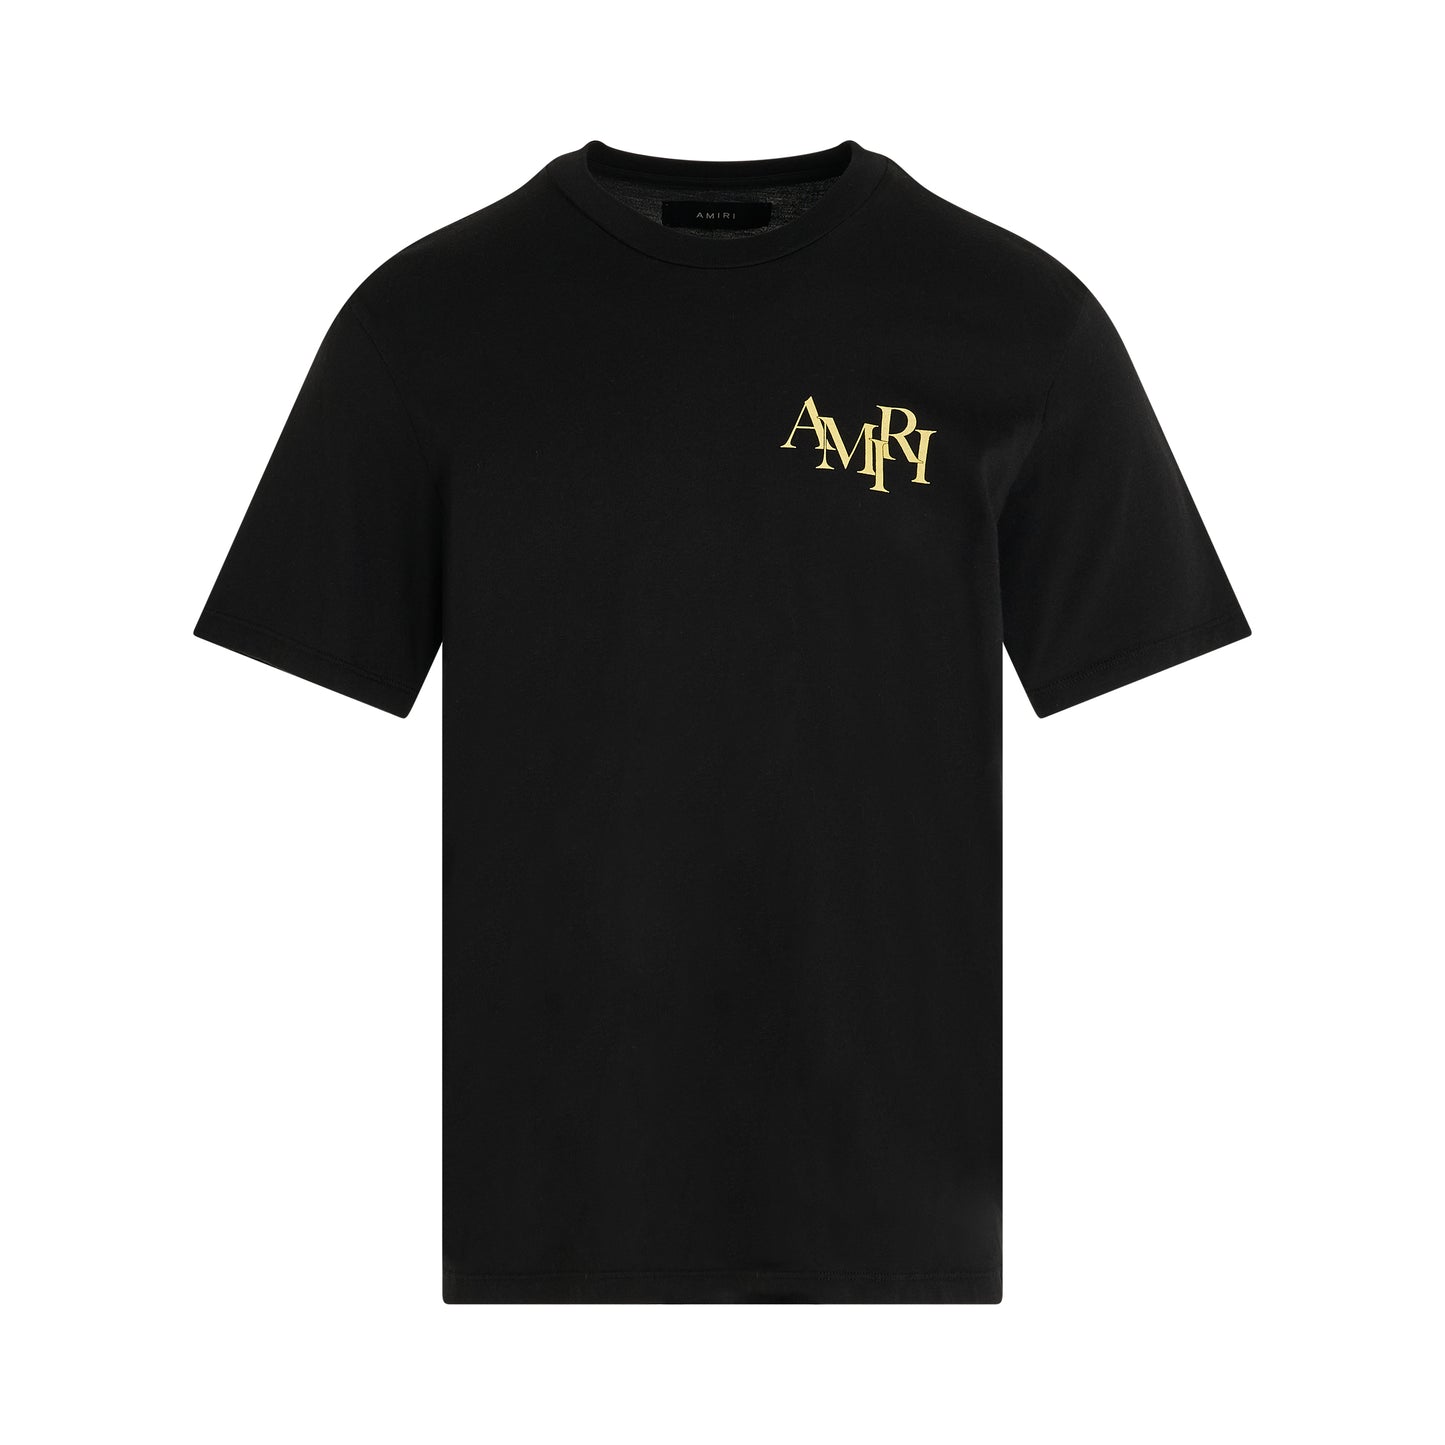 Crystal Champagne T-Shirt in Black